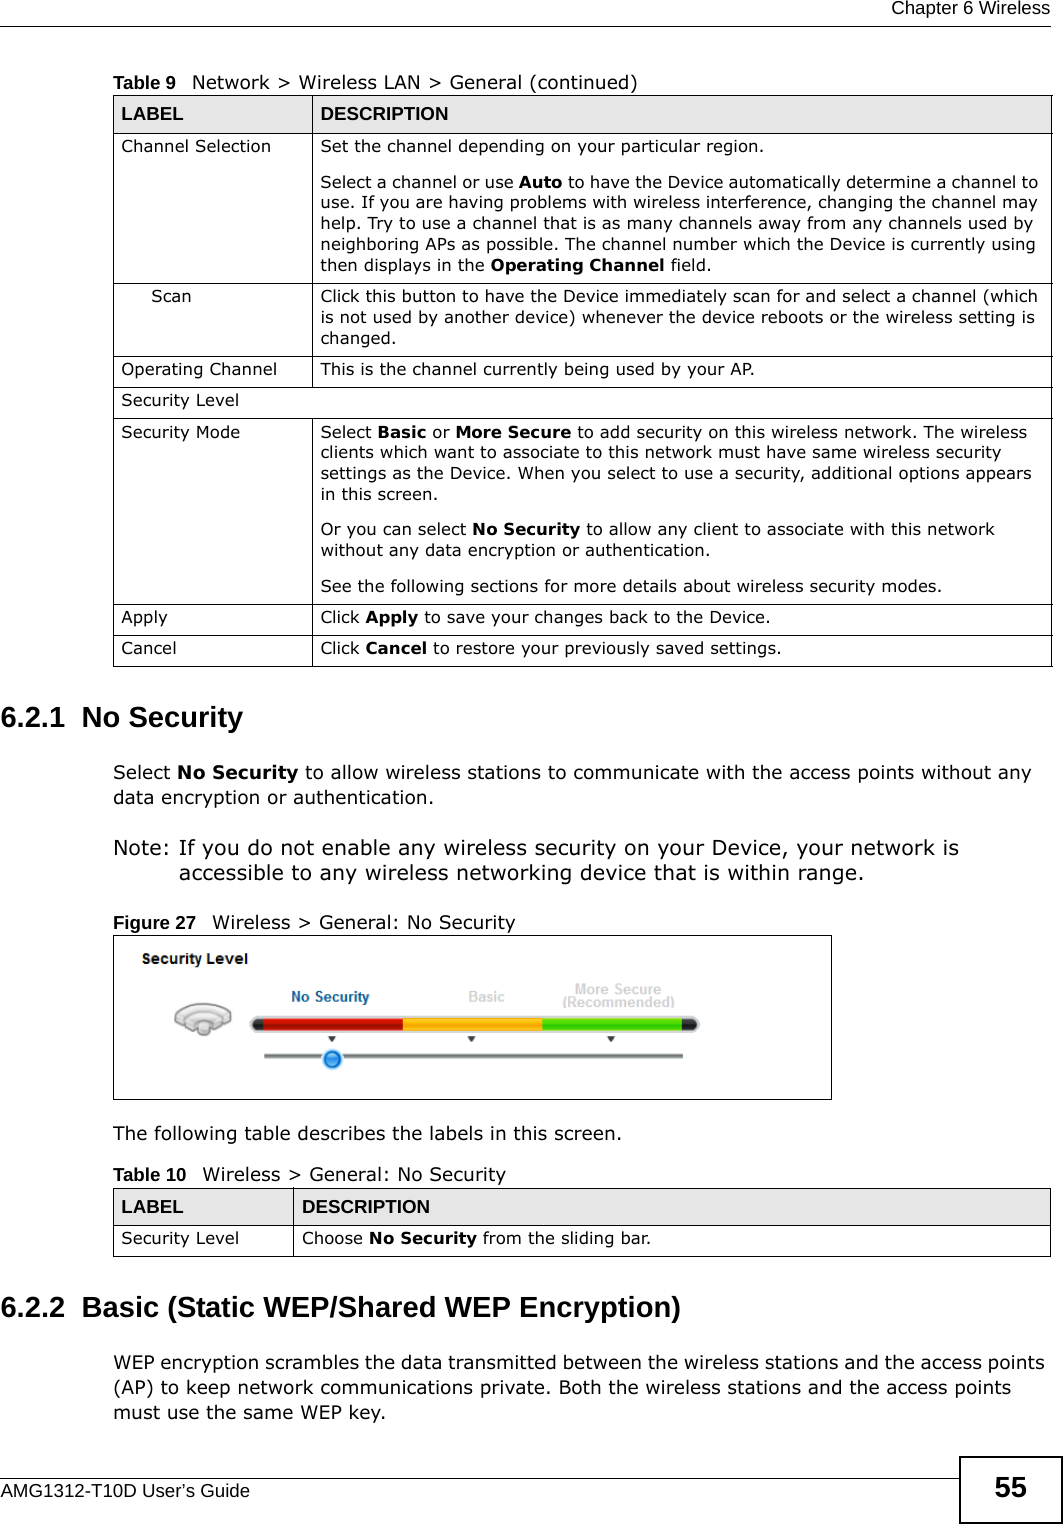  Chapter 6 WirelessAMG1312-T10D User’s Guide 556.2.1  No SecuritySelect No Security to allow wireless stations to communicate with the access points without any data encryption or authentication.Note: If you do not enable any wireless security on your Device, your network is accessible to any wireless networking device that is within range.Figure 27   Wireless &gt; General: No SecurityThe following table describes the labels in this screen.6.2.2  Basic (Static WEP/Shared WEP Encryption)WEP encryption scrambles the data transmitted between the wireless stations and the access points (AP) to keep network communications private. Both the wireless stations and the access points must use the same WEP key.Channel Selection Set the channel depending on your particular region.Select a channel or use Auto to have the Device automatically determine a channel to use. If you are having problems with wireless interference, changing the channel may help. Try to use a channel that is as many channels away from any channels used by neighboring APs as possible. The channel number which the Device is currently using then displays in the Operating Channel field.Scan Click this button to have the Device immediately scan for and select a channel (which is not used by another device) whenever the device reboots or the wireless setting is changed.Operating Channel This is the channel currently being used by your AP.Security LevelSecurity Mode Select Basic or More Secure to add security on this wireless network. The wireless clients which want to associate to this network must have same wireless security settings as the Device. When you select to use a security, additional options appears in this screen. Or you can select No Security to allow any client to associate with this network without any data encryption or authentication.See the following sections for more details about wireless security modes.Apply Click Apply to save your changes back to the Device.Cancel Click Cancel to restore your previously saved settings.Table 9   Network &gt; Wireless LAN &gt; General (continued)LABEL DESCRIPTIONTable 10   Wireless &gt; General: No SecurityLABEL DESCRIPTIONSecurity Level Choose No Security from the sliding bar.